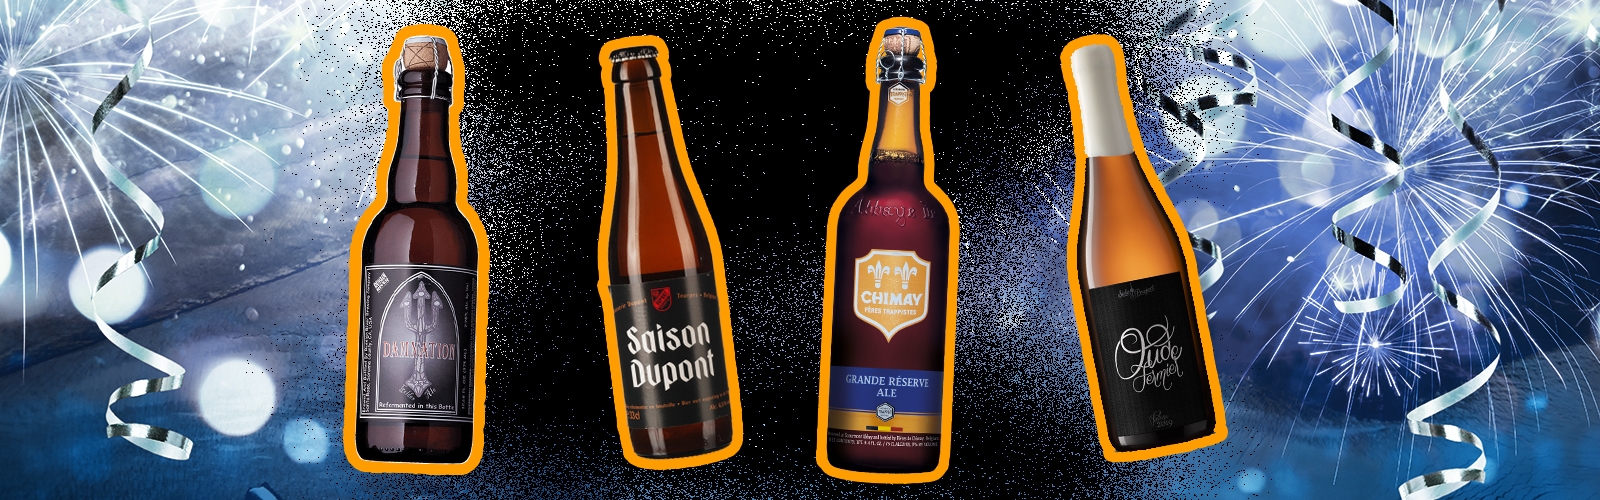 Russian River/Dupont/Chimay/Side Project/istock/Uproxx